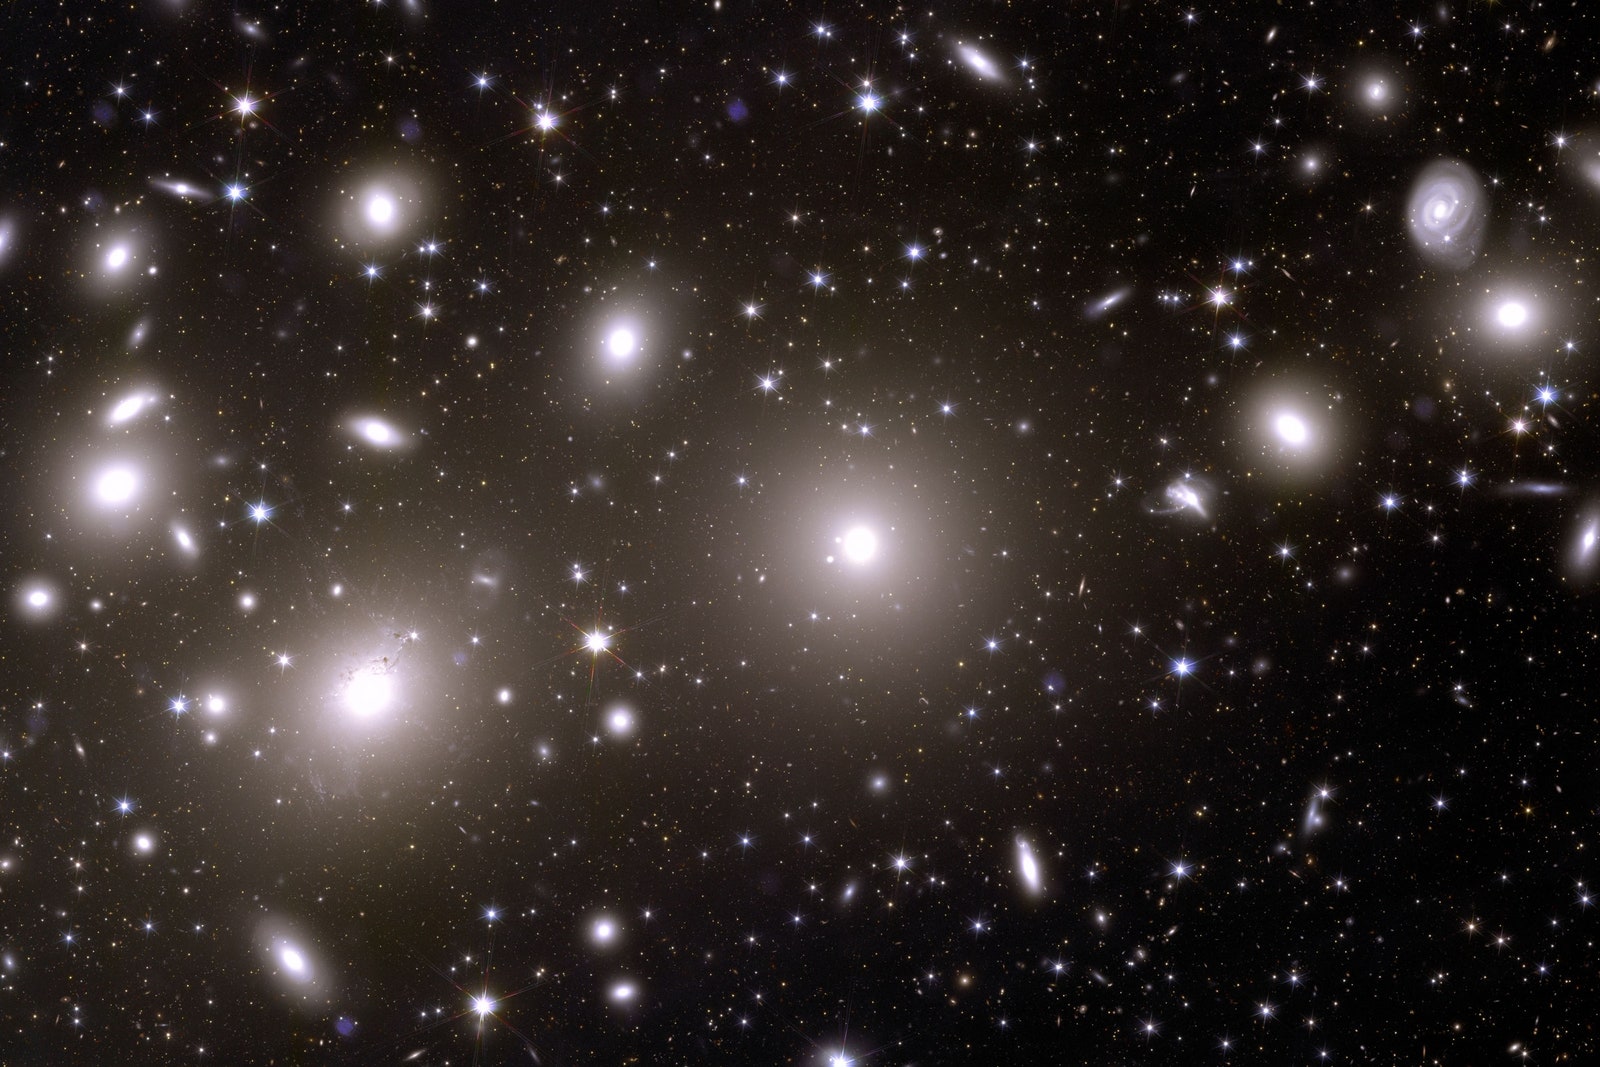 The Euclid Space Telescope’s Spectacular First Photos of Distant and Hidden Galaxies